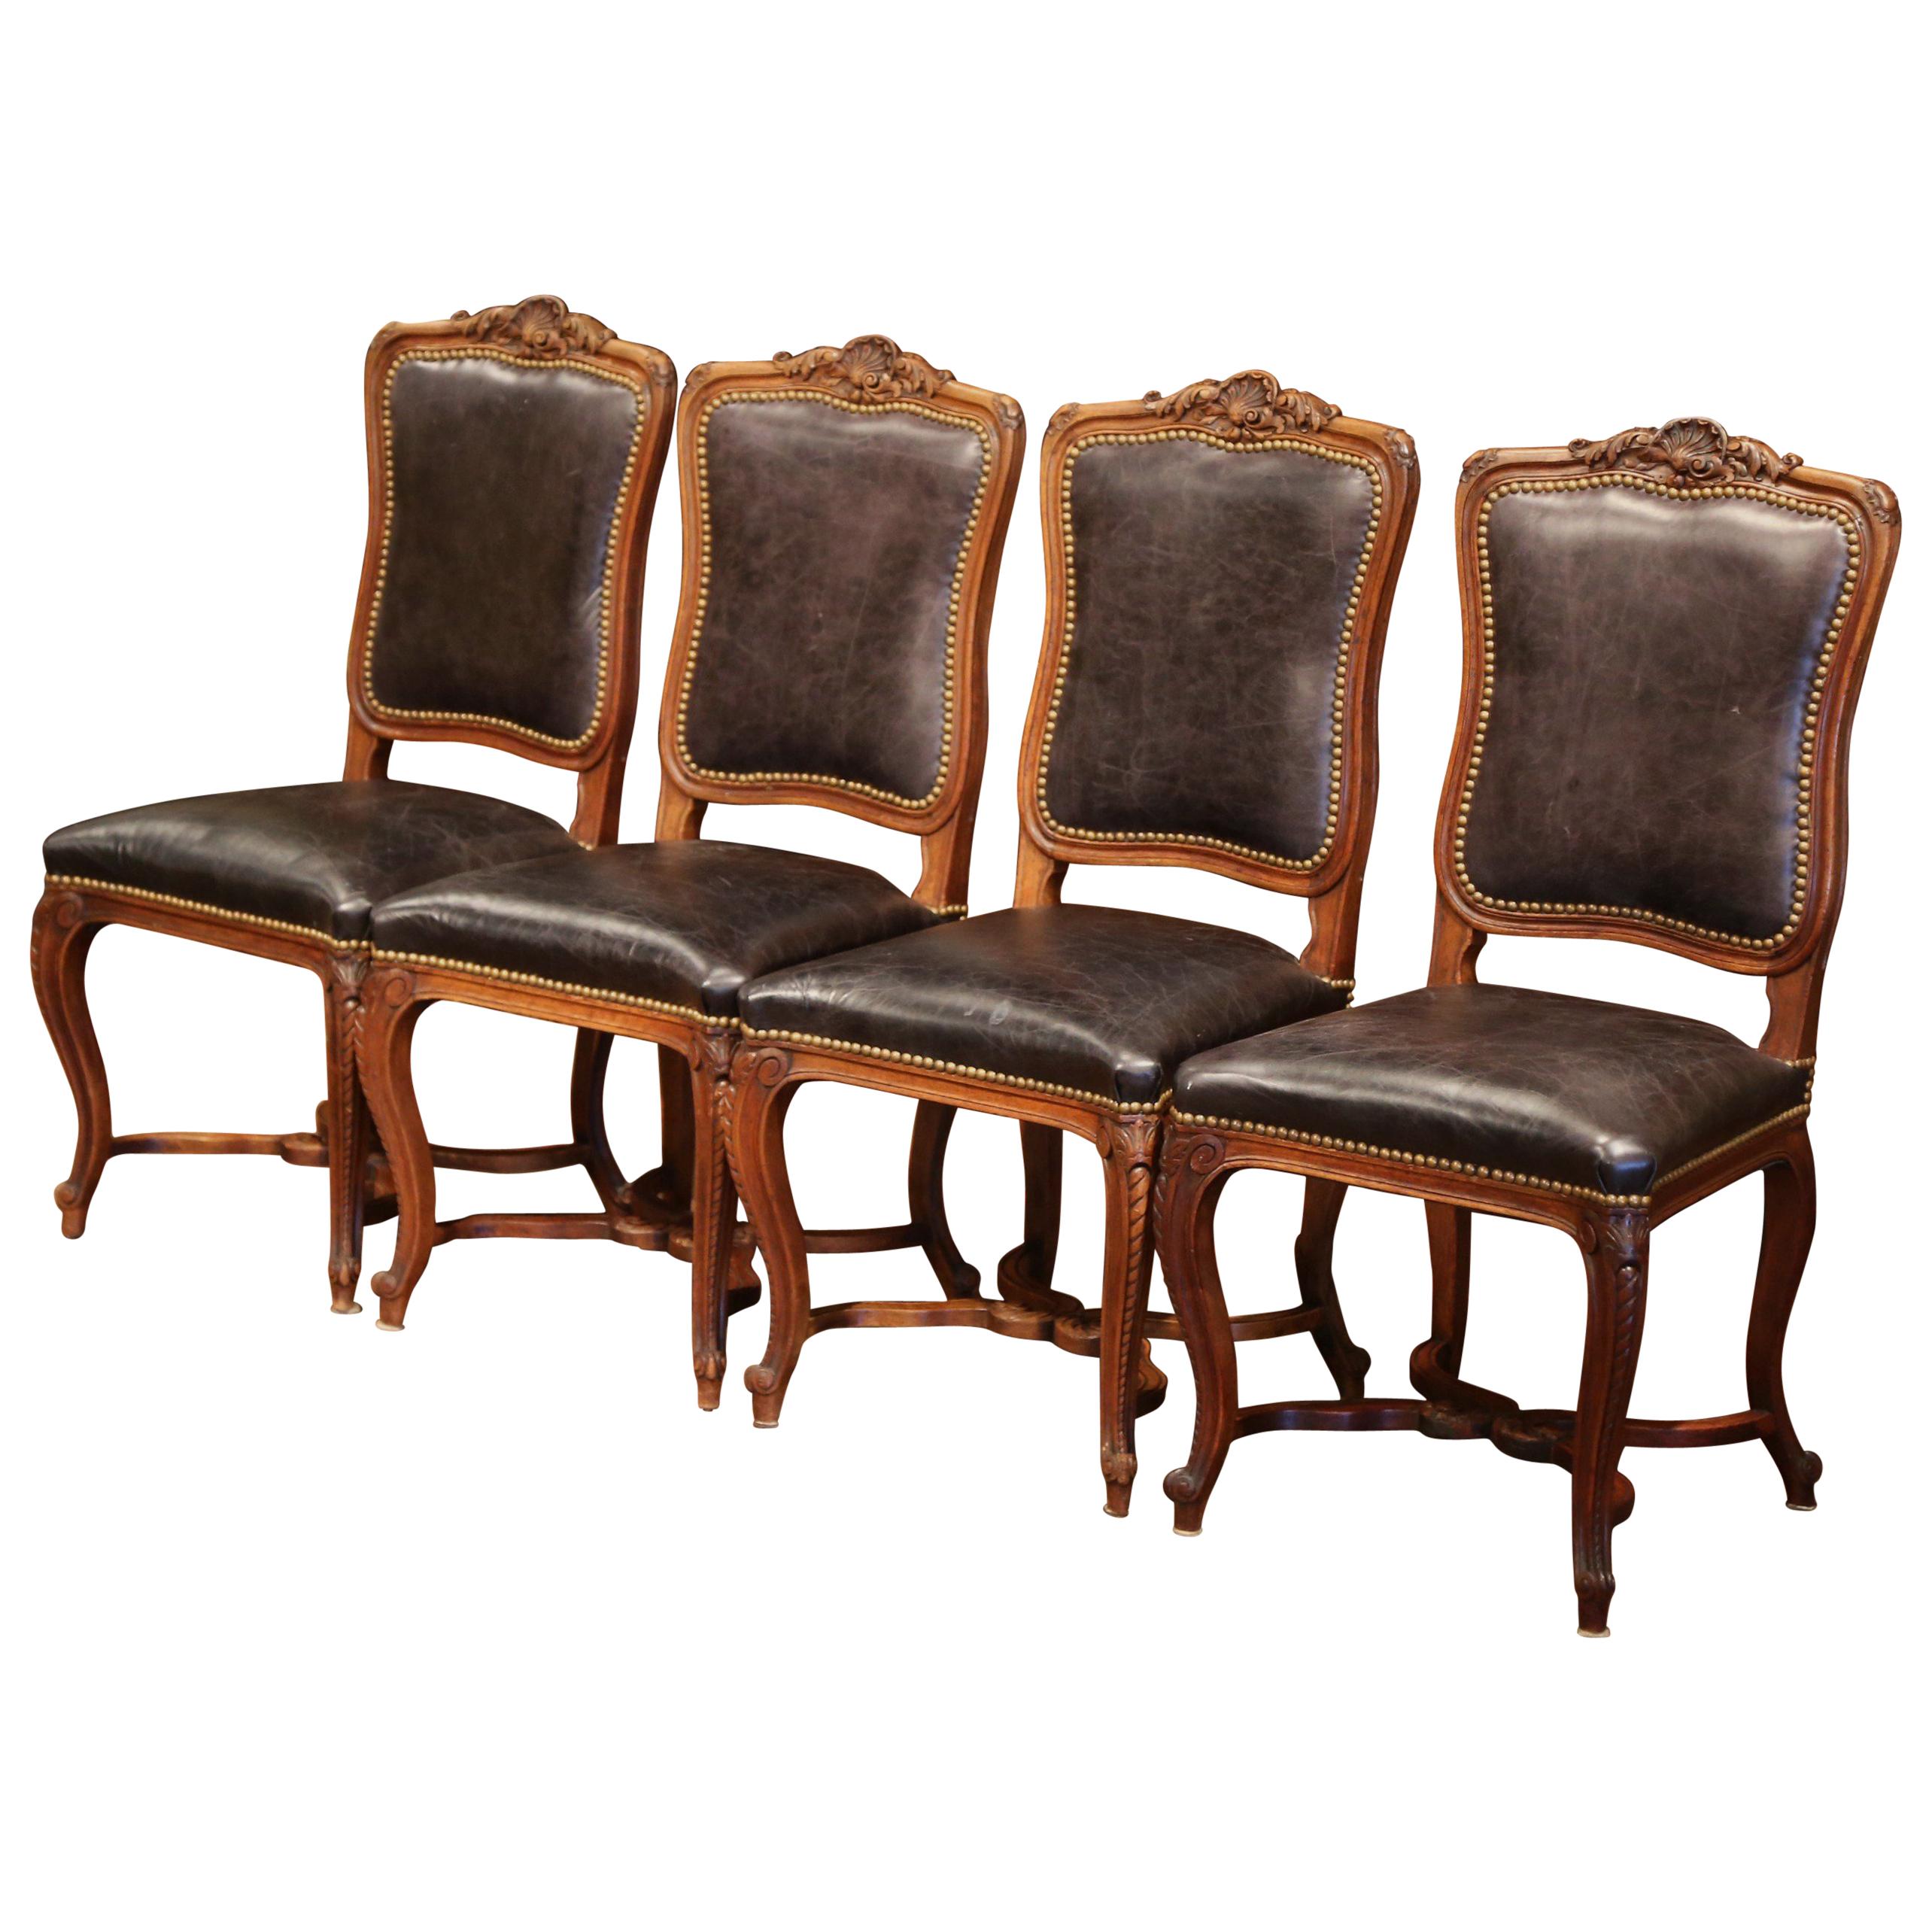 19th Century French Louis XV Carved Walnut Chairs with Leather, Set of Four